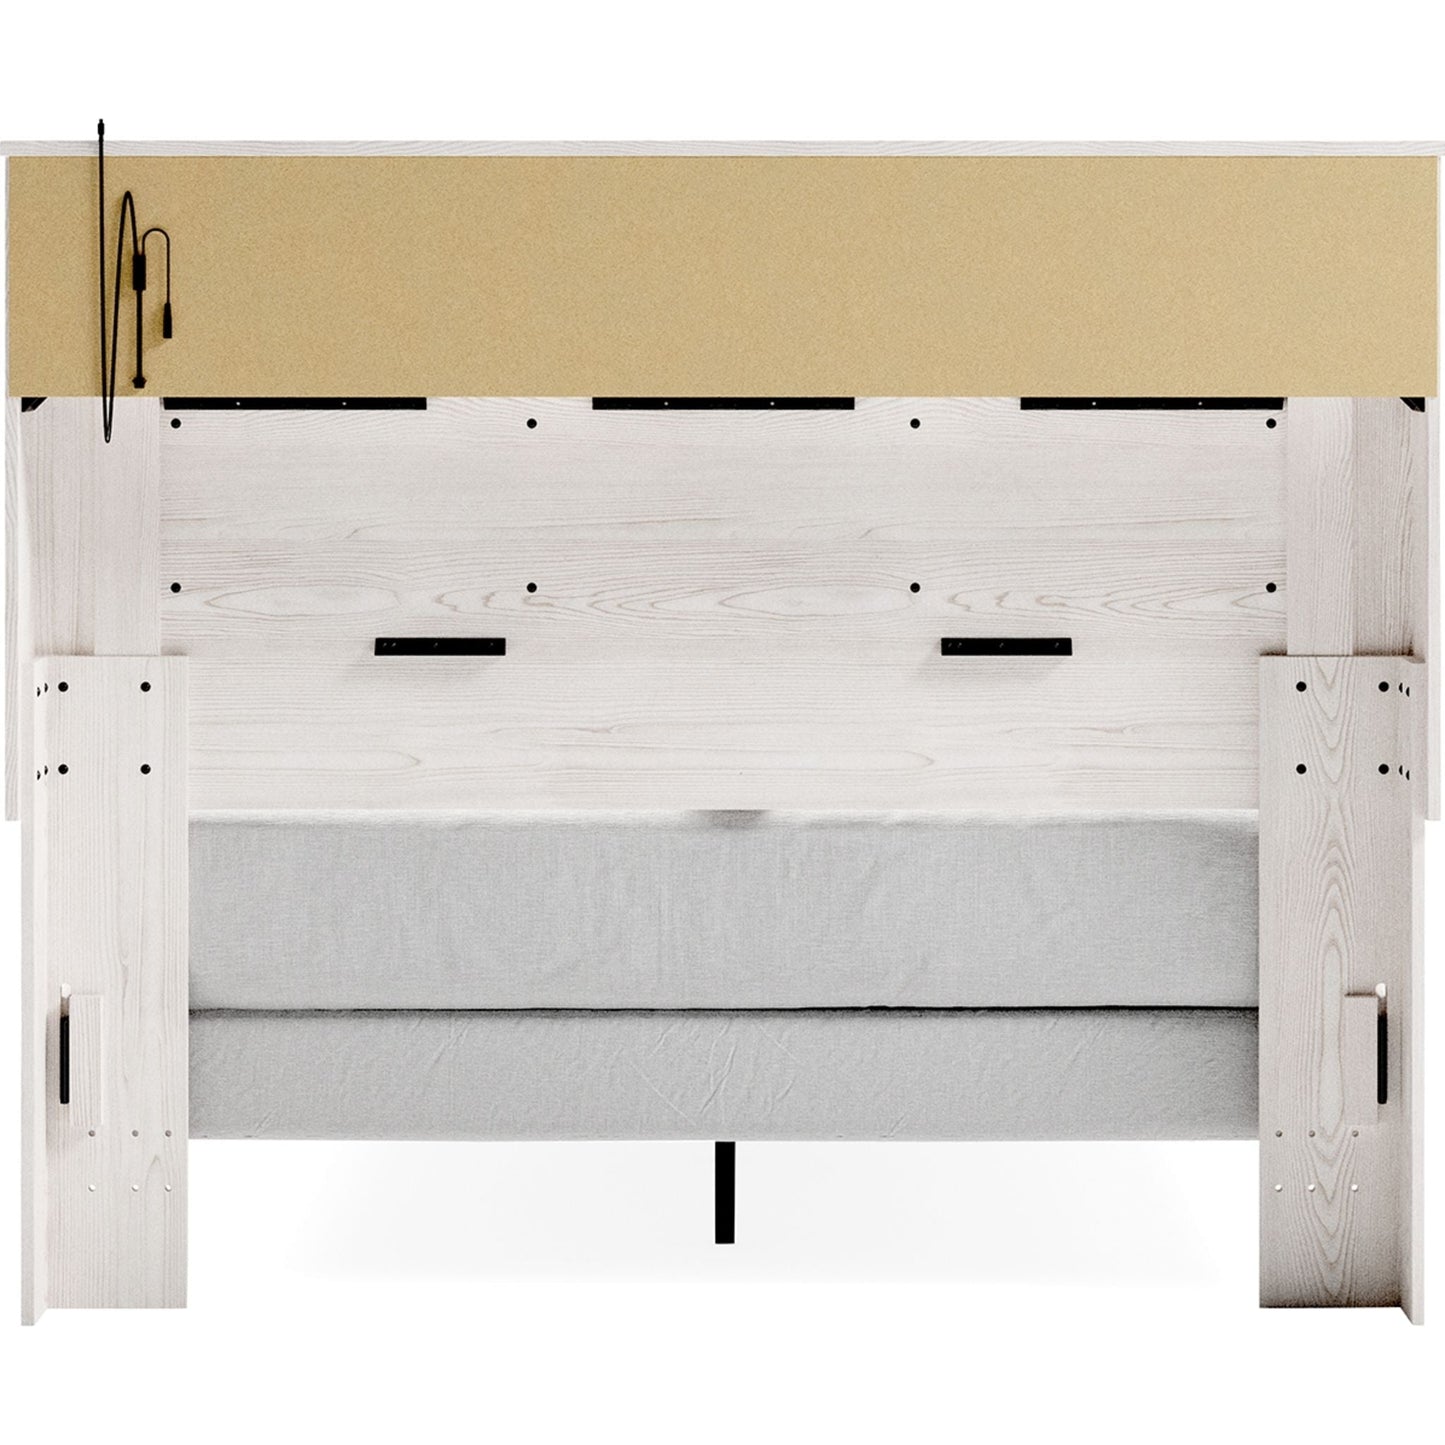 Oliah 3 Piece Queen Bed - White